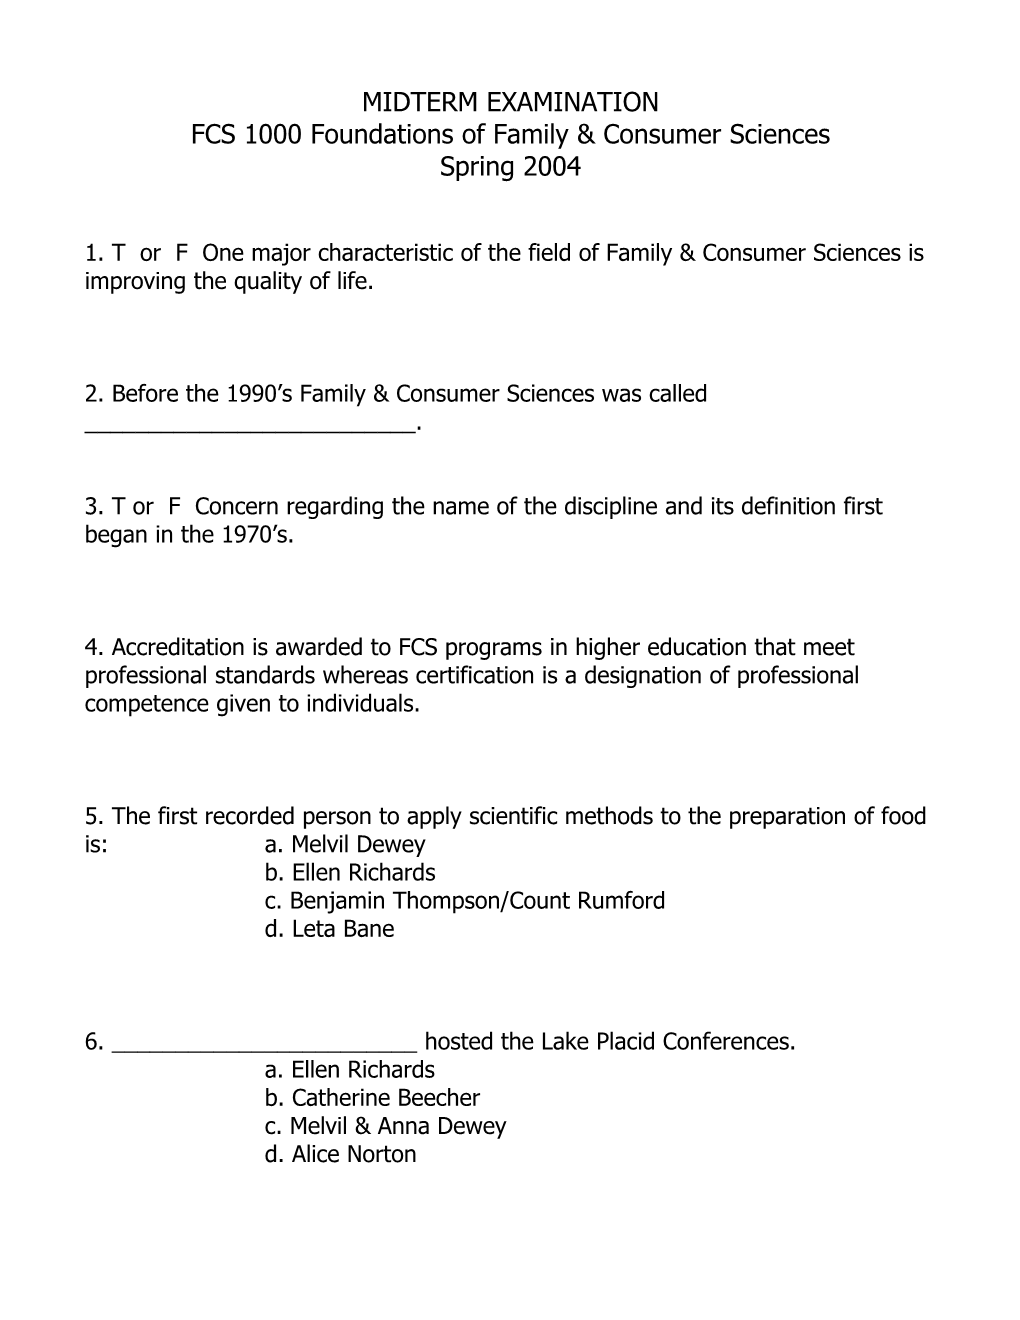 FCS 1000 Foundations of Family & Consumer Sciences